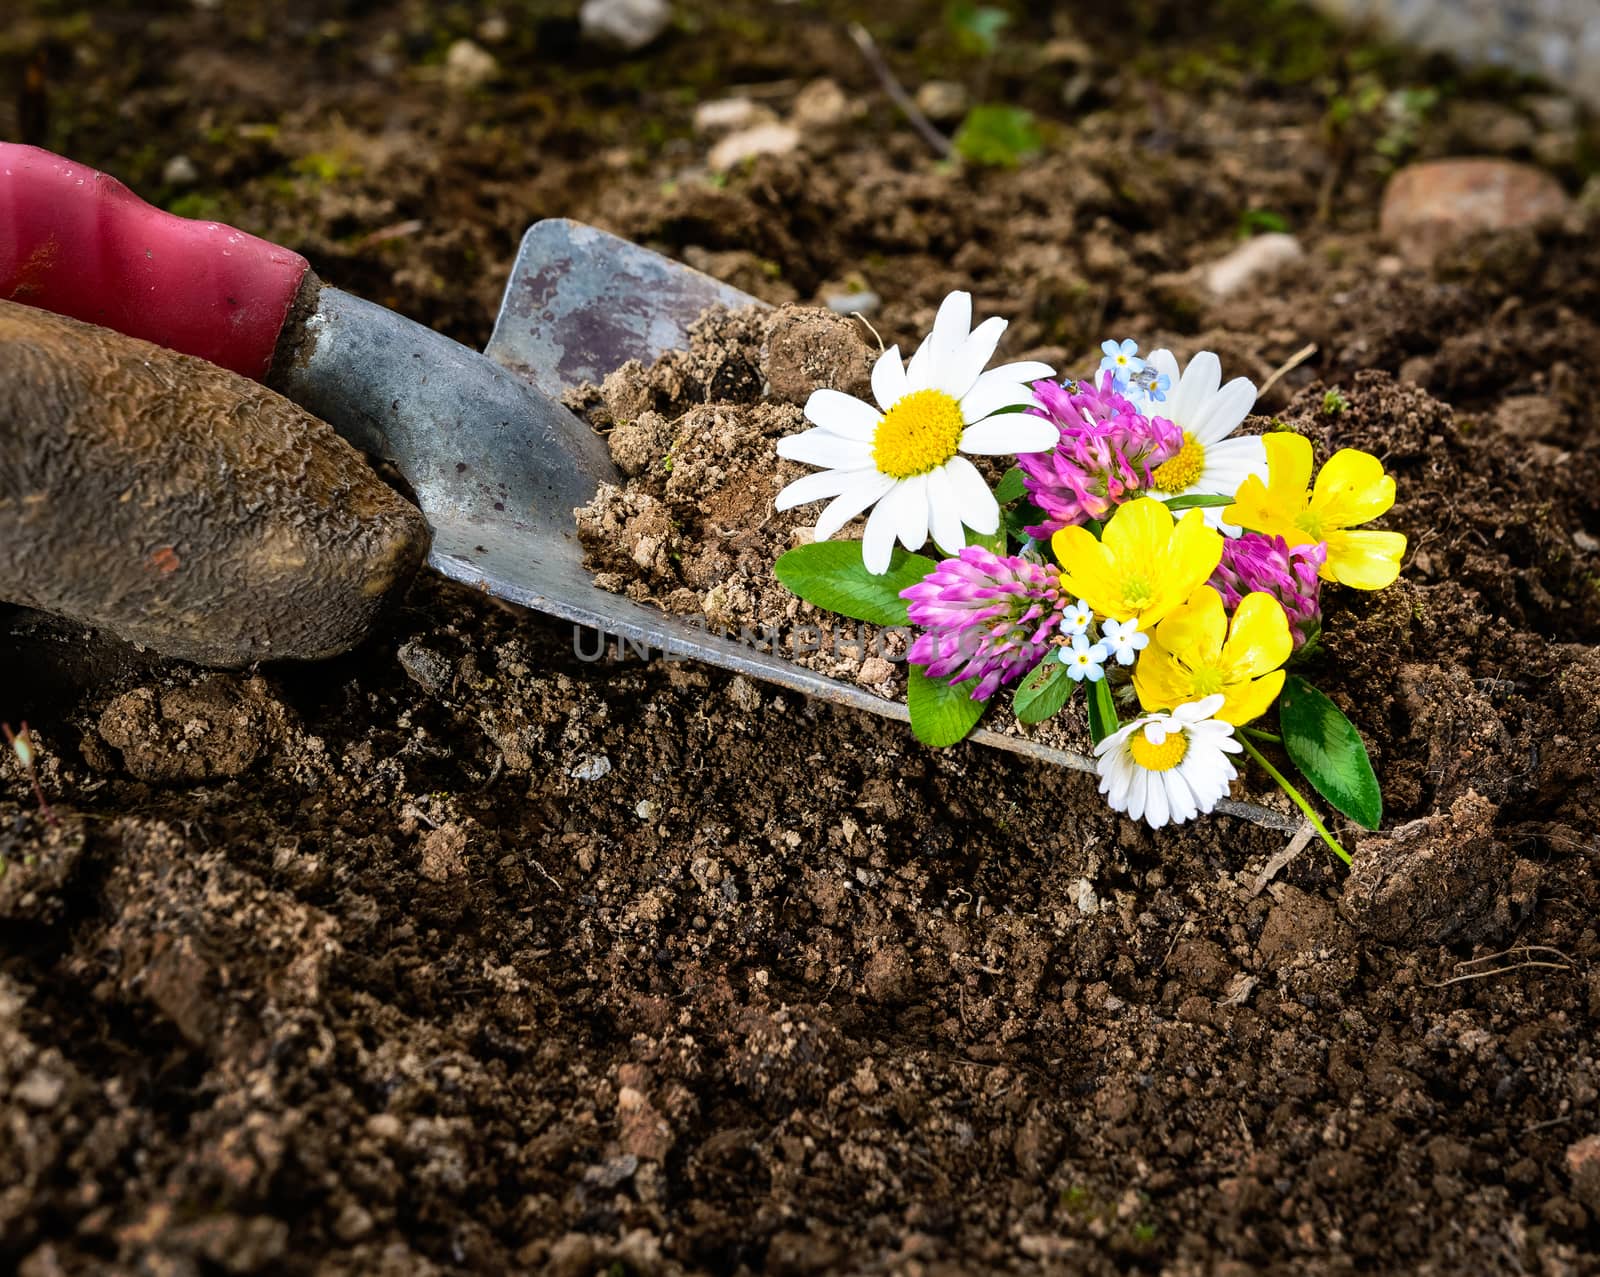 pictured a glove and gardening with a shovel in the ground , wildflowers and daisies